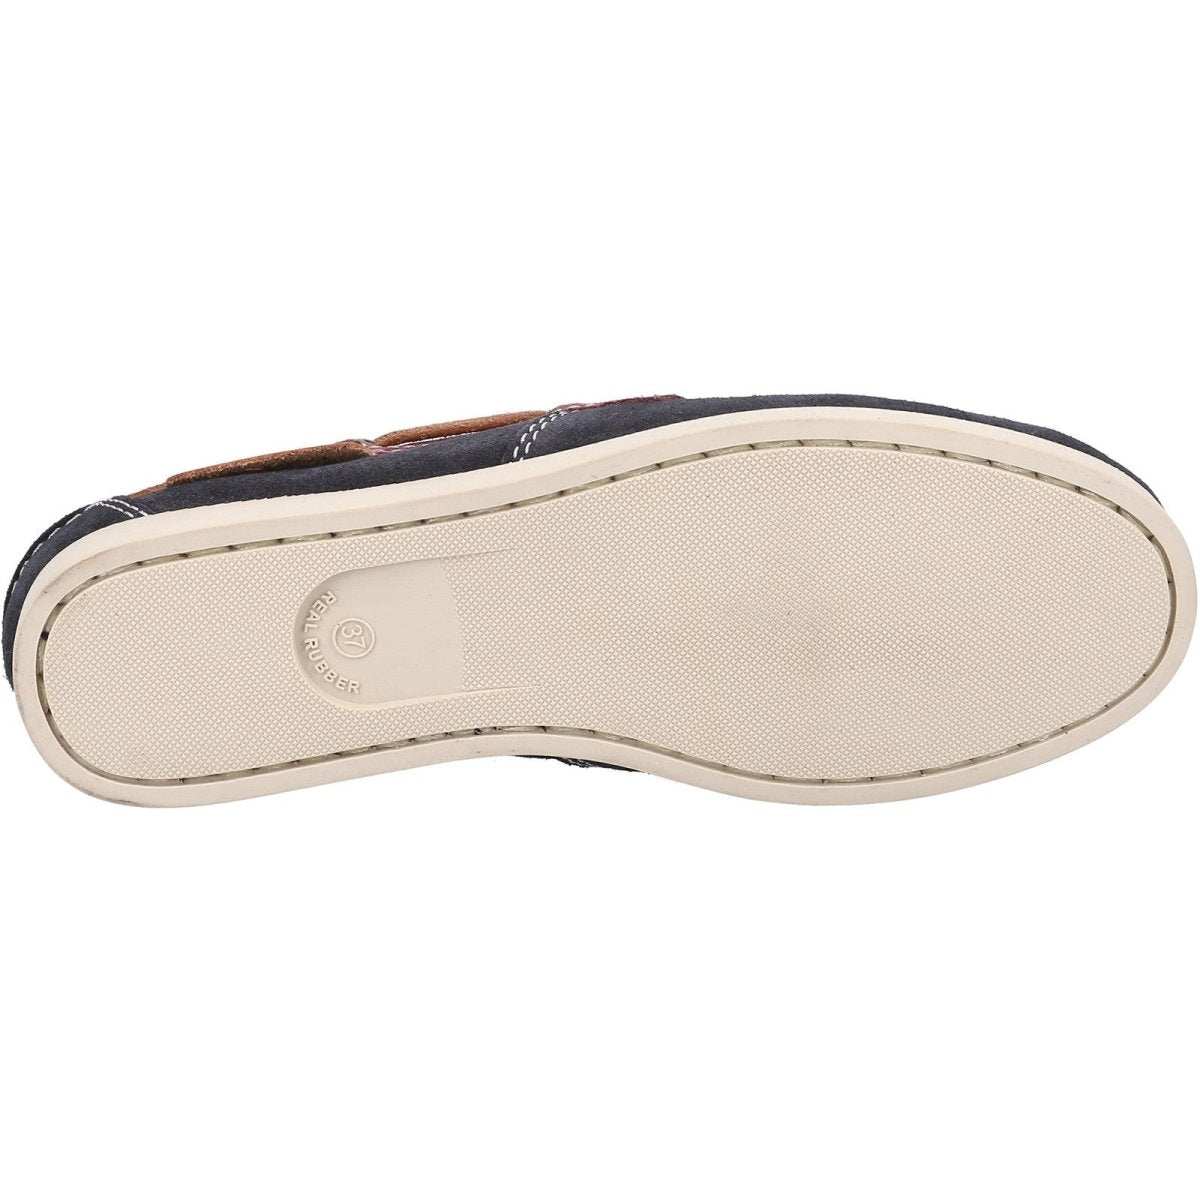 Cotswold Idbury Ladies Suede Moccasin Boat Shoes - Shoe Store Direct